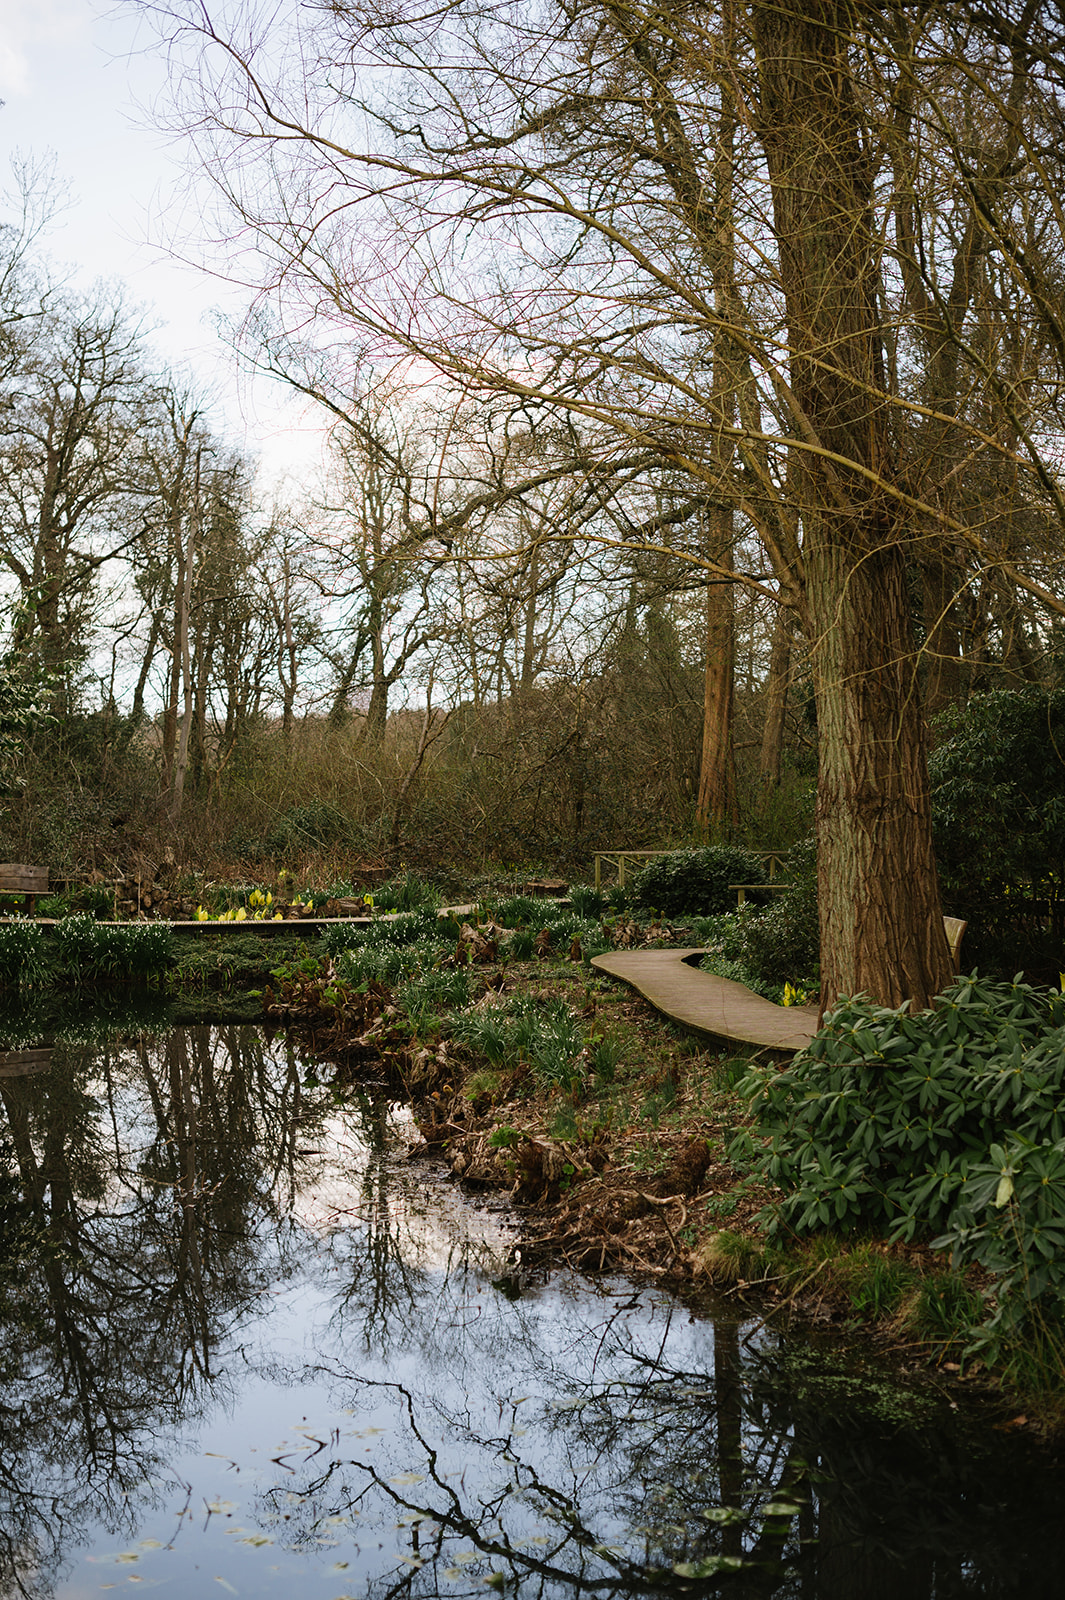 Spring engagement photo session at Winterbourne House and Gardens at the University of Birmingham